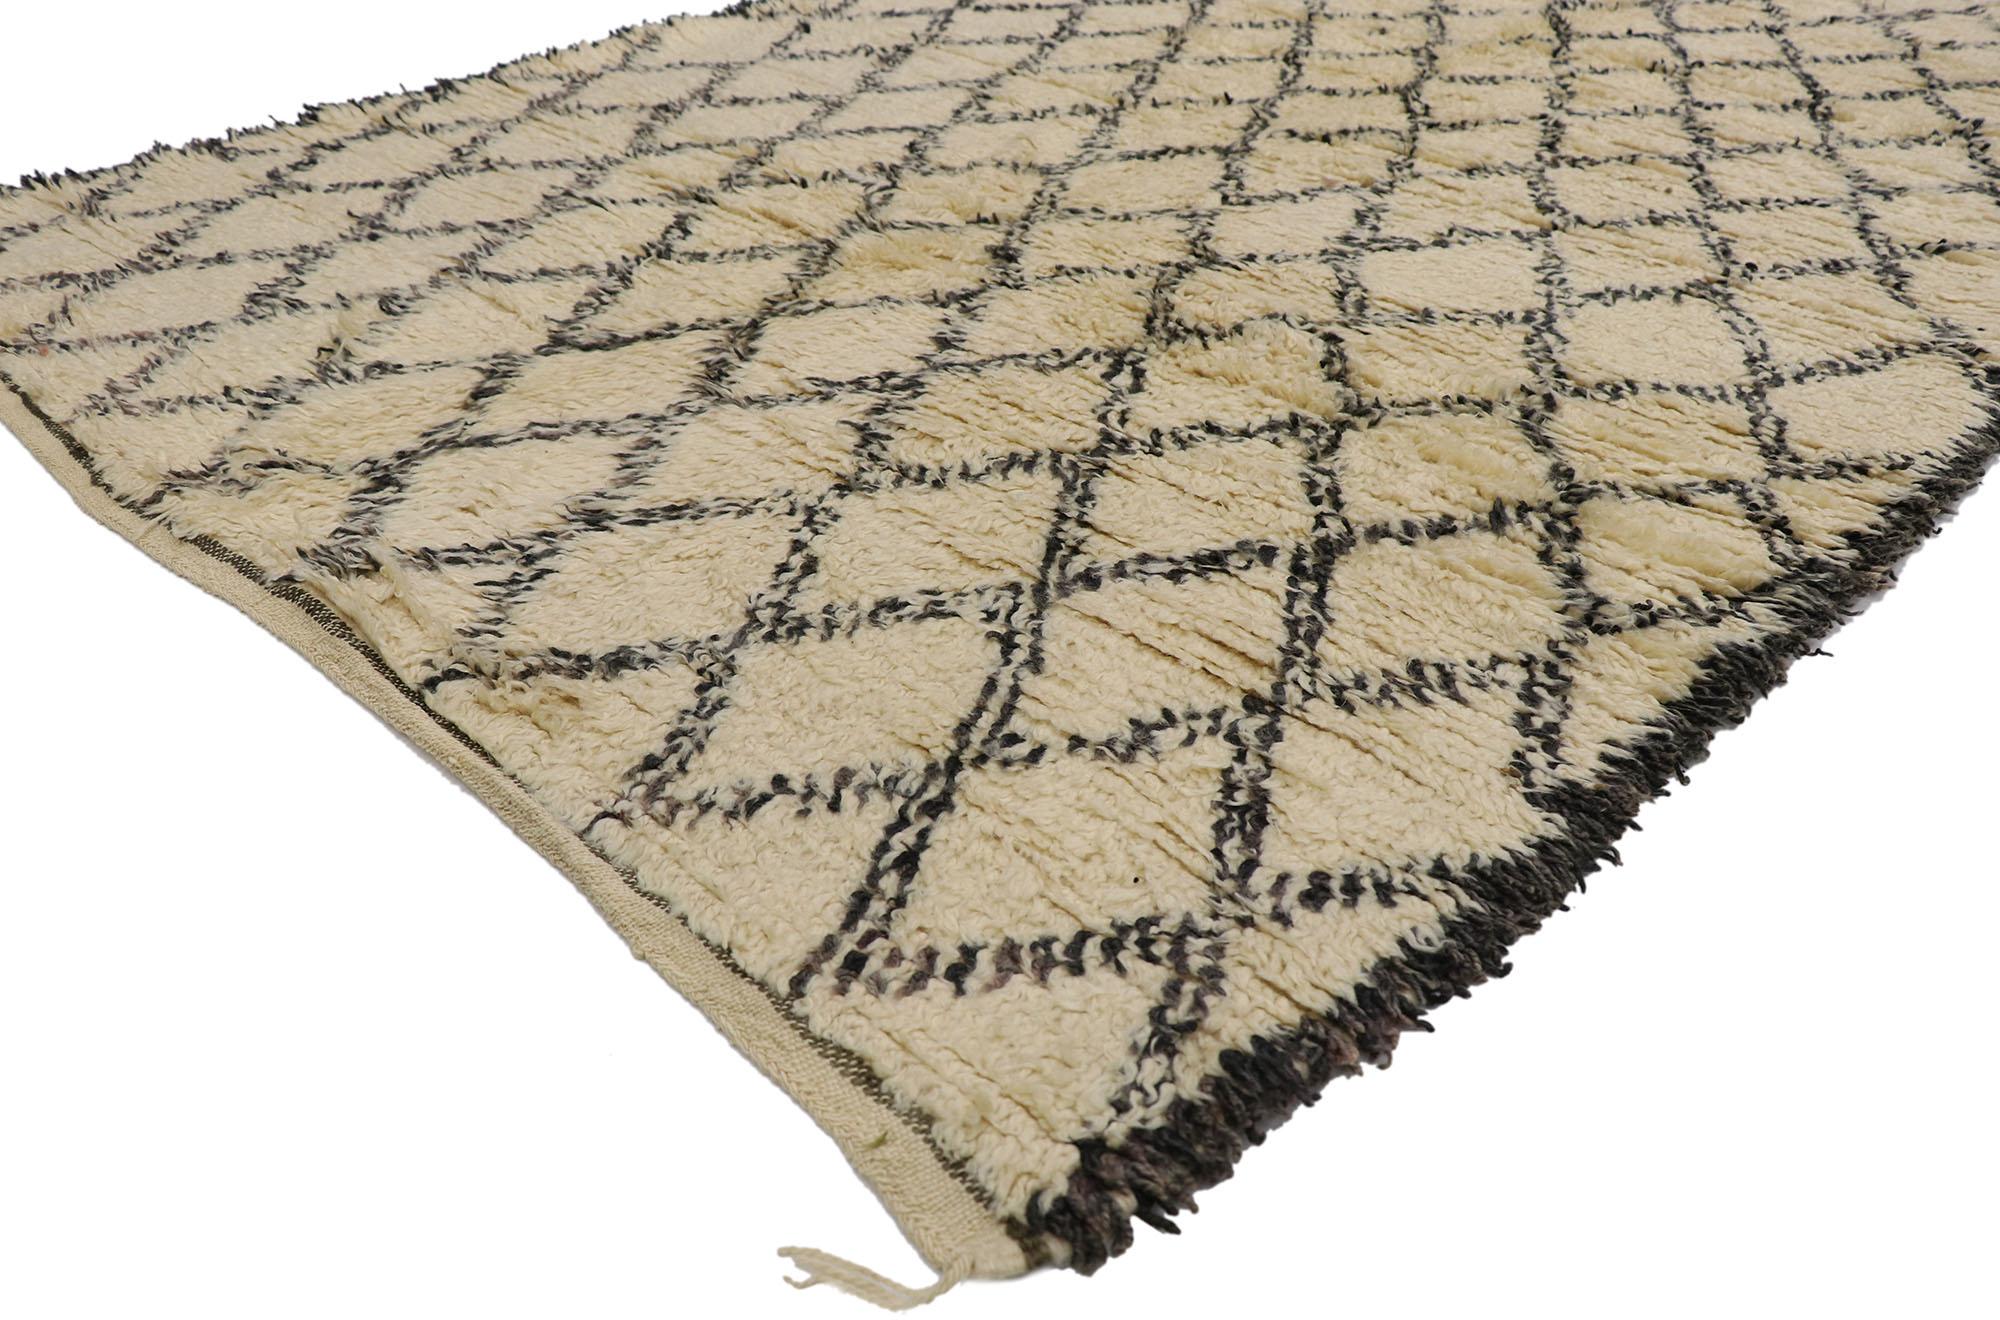 21461 Vintage Berber Moroccan Beni Ourain rug. With its simplicity, plush pile and tribal style, this hand knotted wool vintage Berber Beni Ourain Moroccan rug is a captivating vision of woven beauty. It features a diamond lattice composed of lines